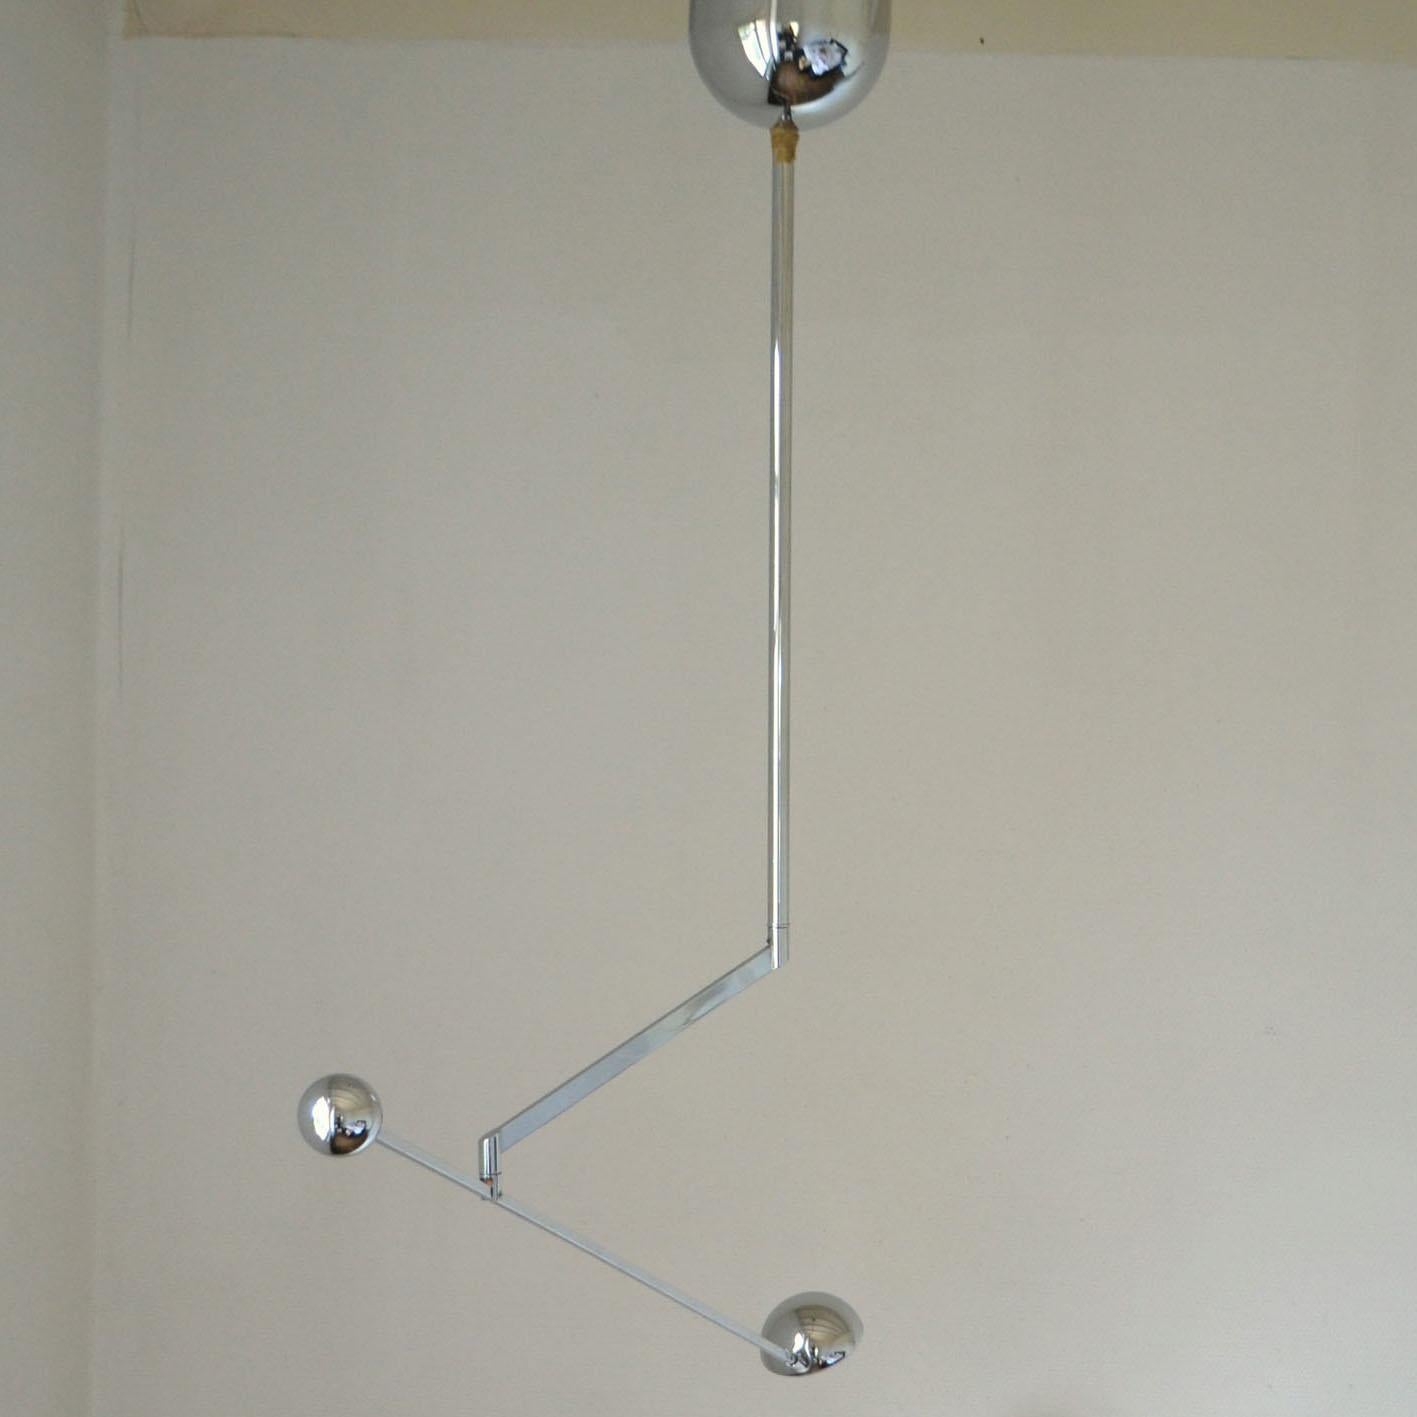 Minimal Chrome Counter Balance Ceiling 1970s Lamp For Sale 2